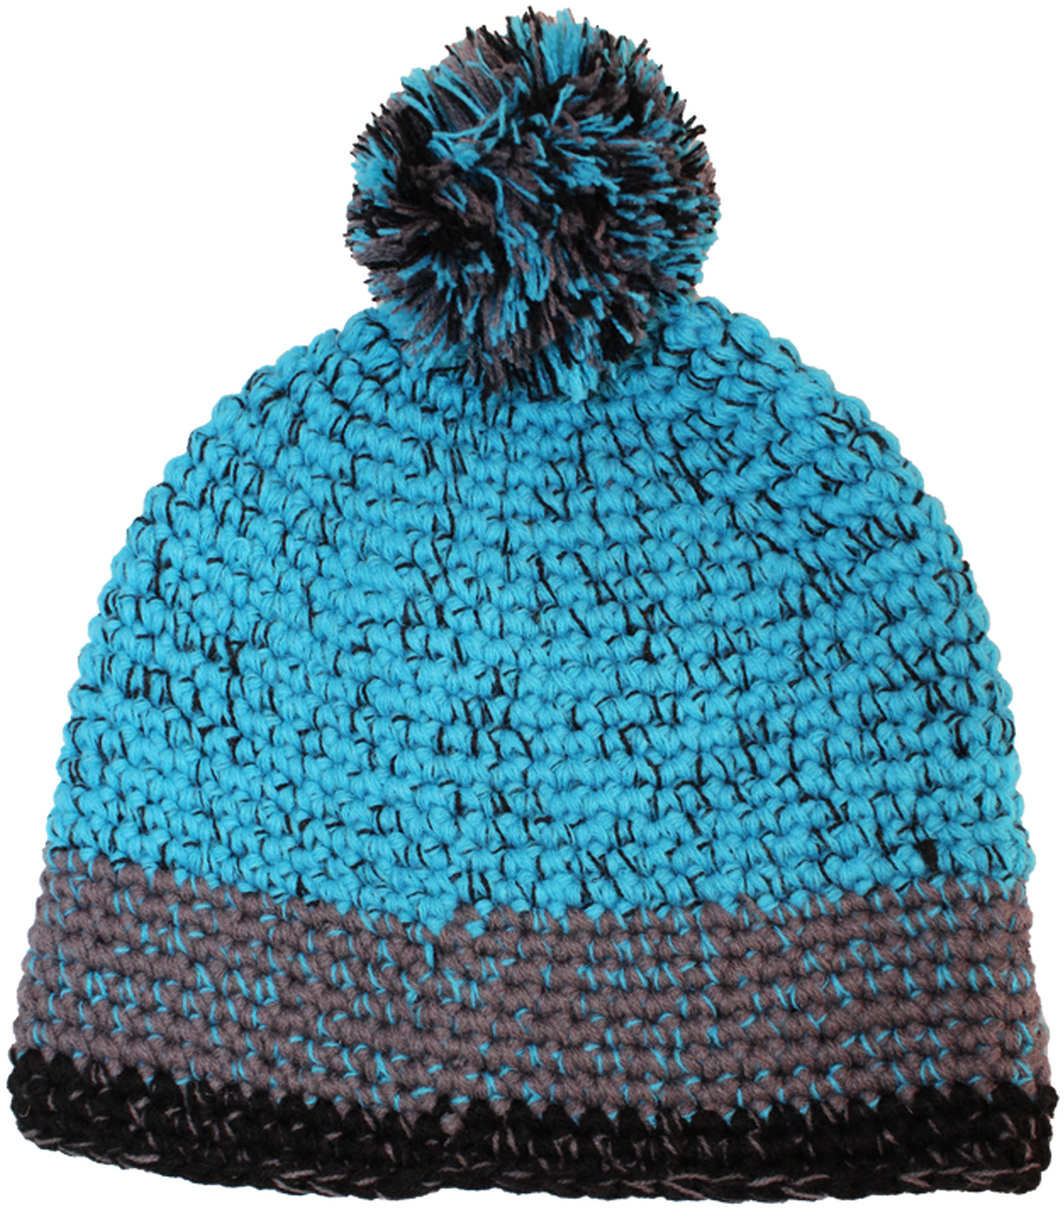 A Blue And Black Knitted Hat